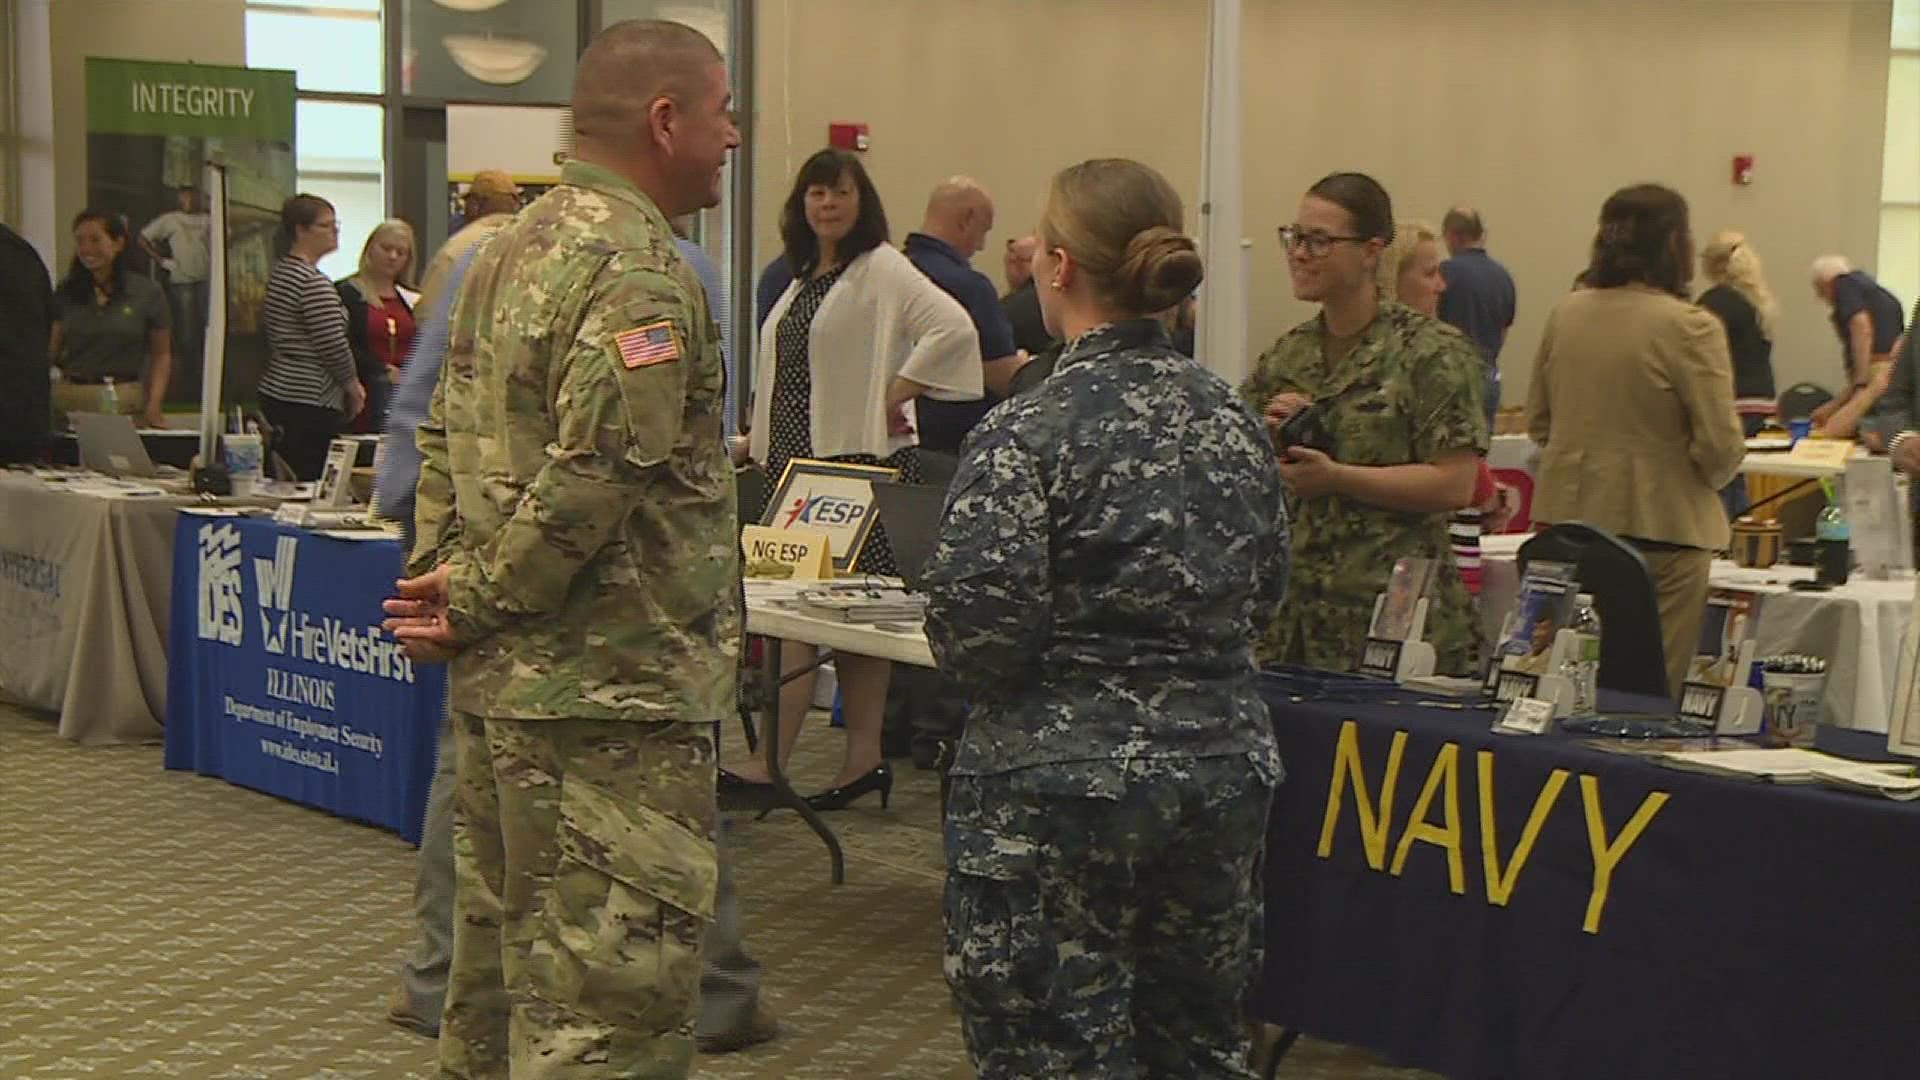 The Success Job Fair aims to help Veterans and community members connect with employers